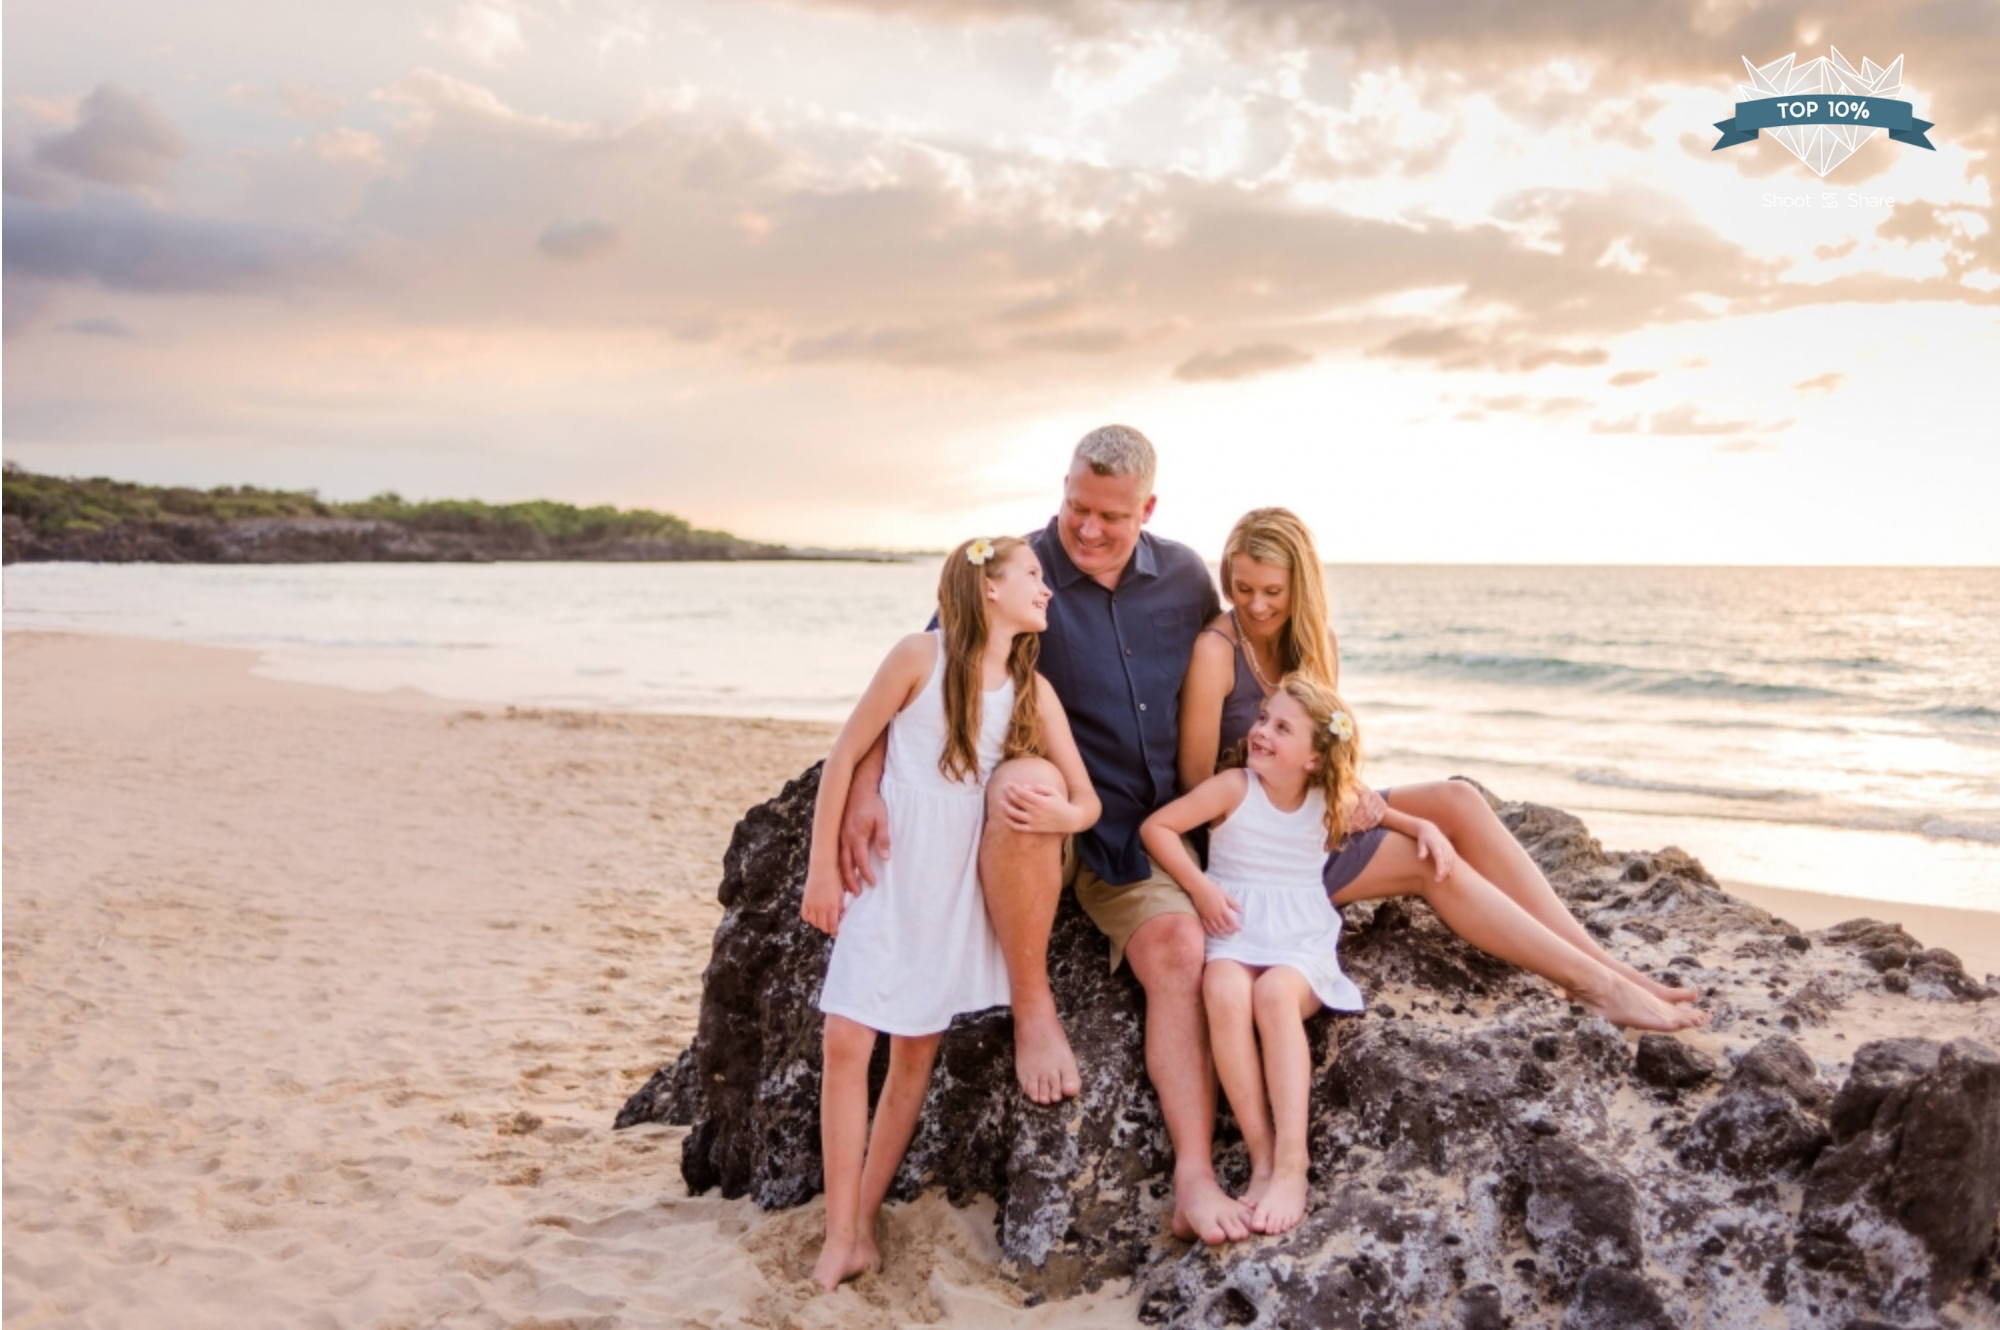 Shoot-Share-Contest-2018-Hawaii-Top-10-Family-Portrait-Sunset-photographer.png